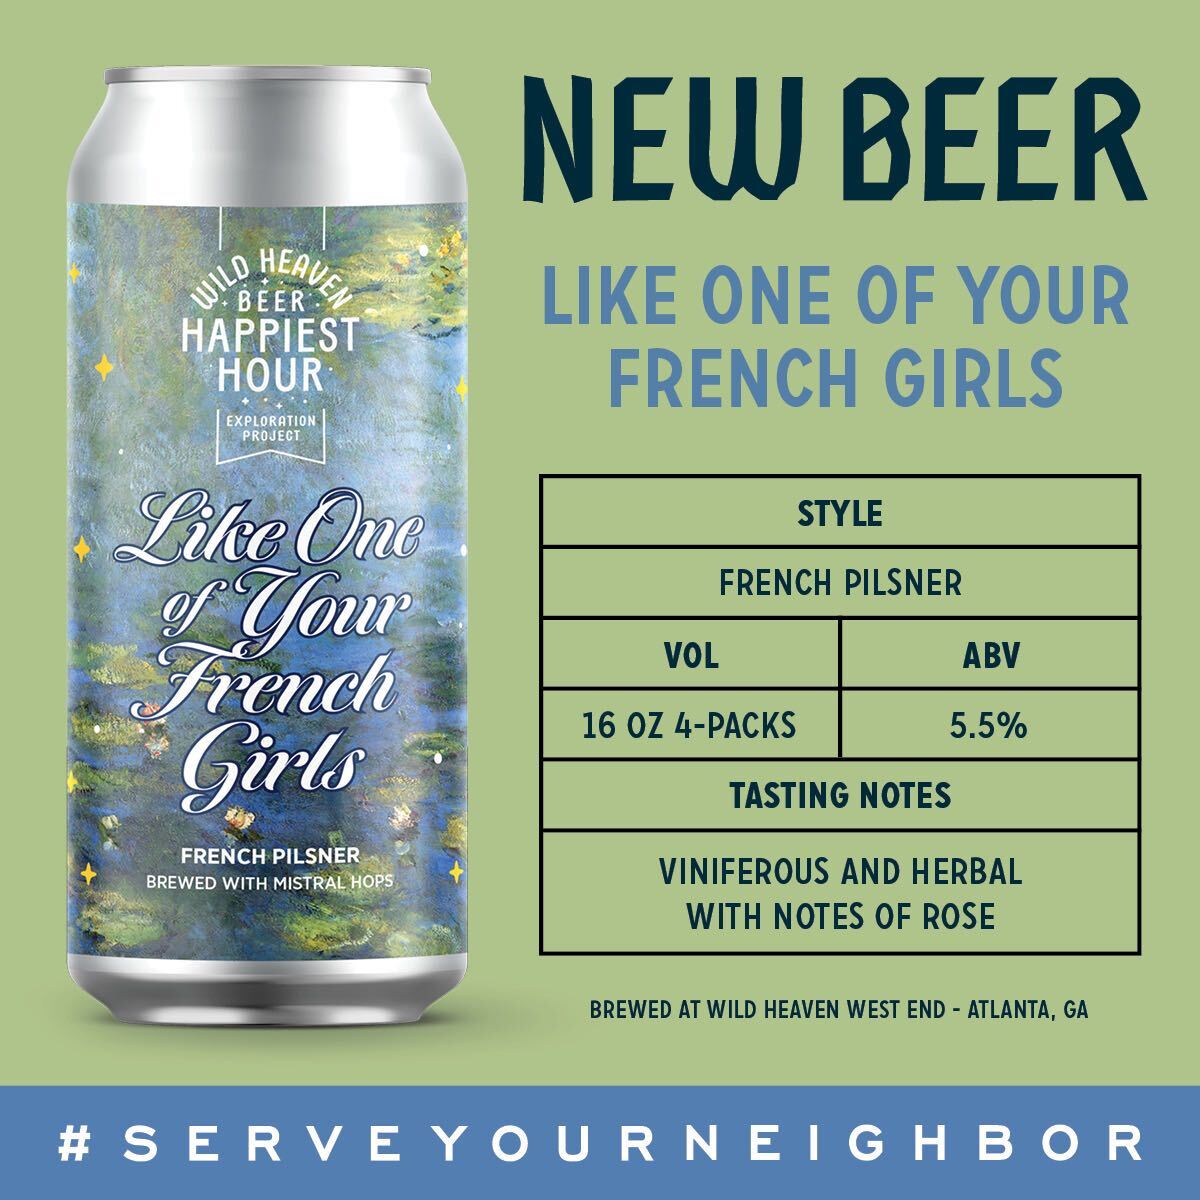 You should want to come drink this 'French' Pilsner we made. It's....pretty, pretty, prettaaayyyy good.